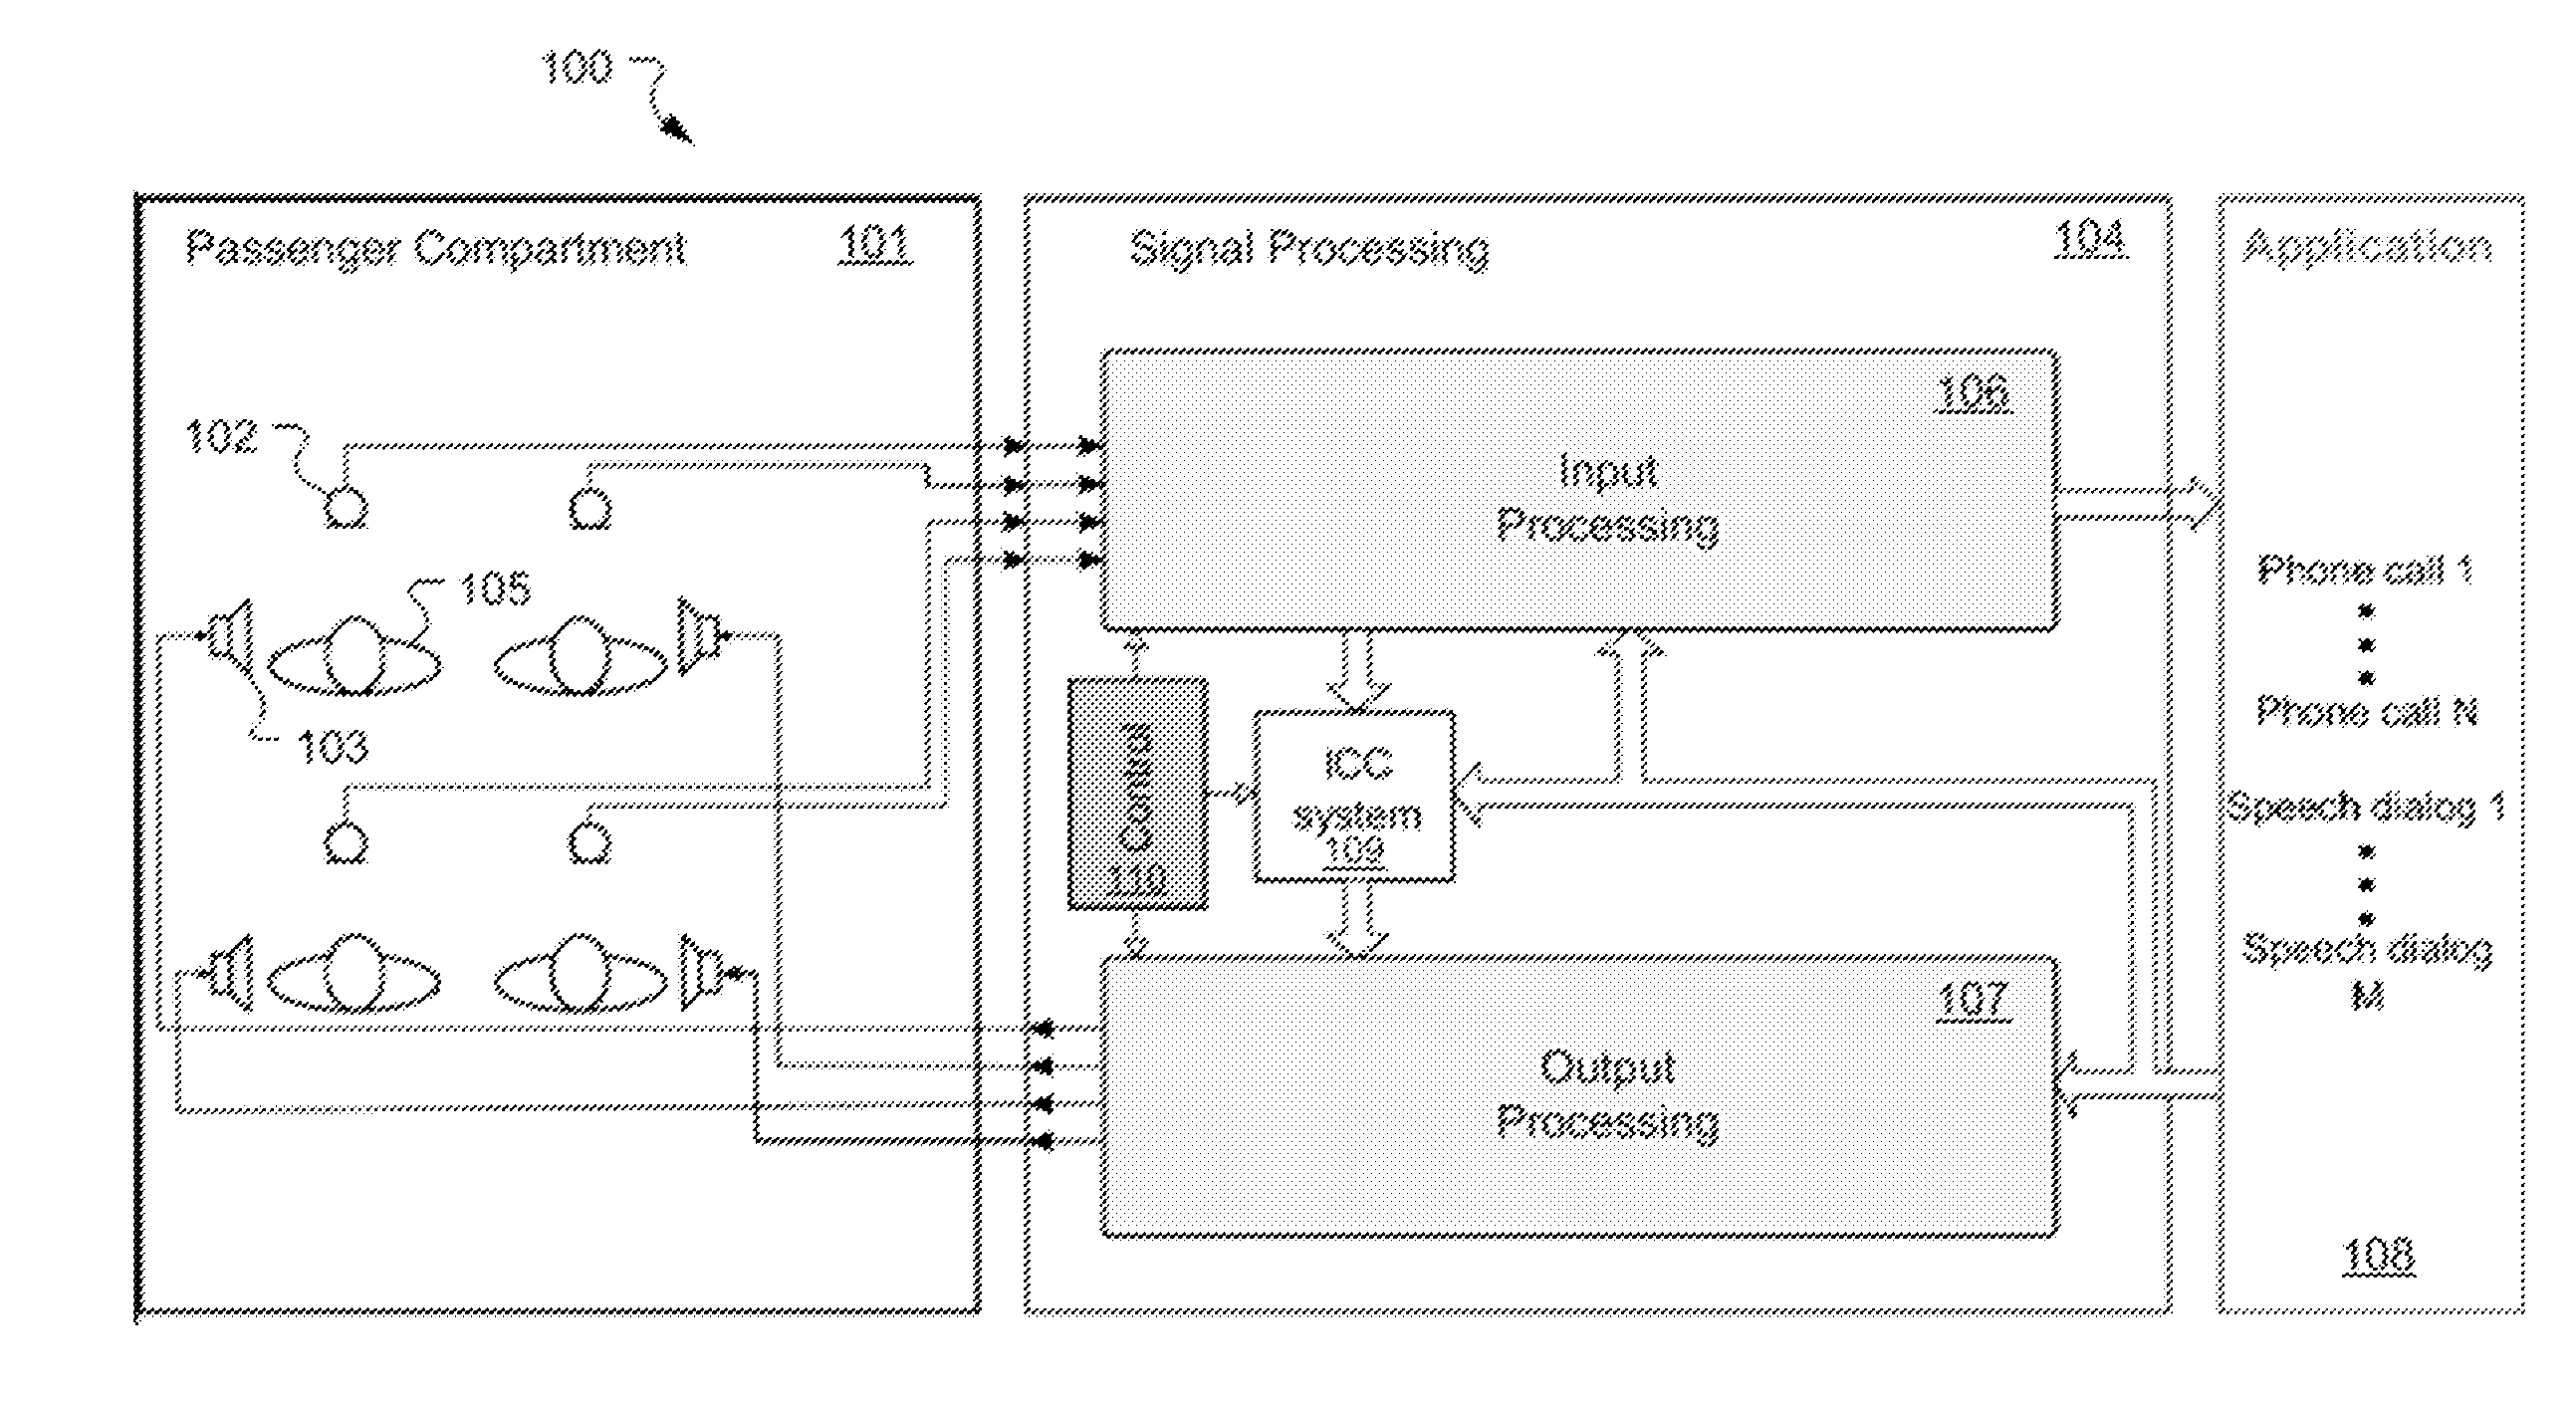 Speech communication system for combined voice recognition, hands-free telephony and in-car communication